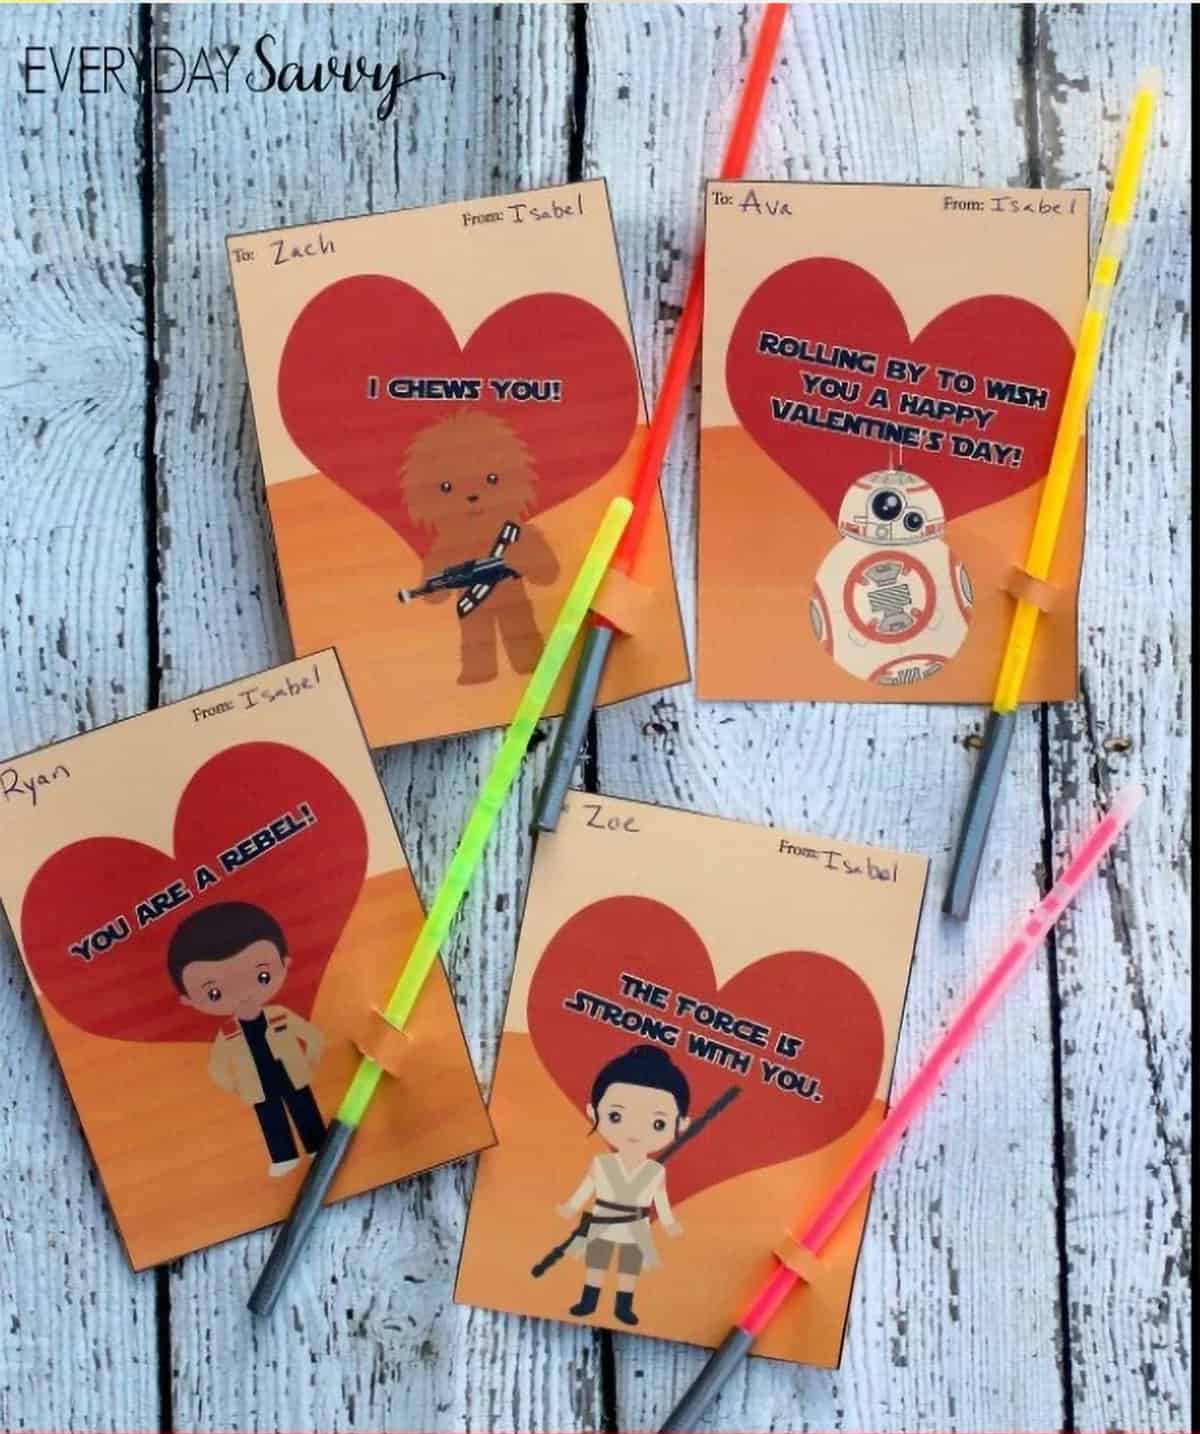 Star wars themed cards with lightsaber glow sticks attached to them.